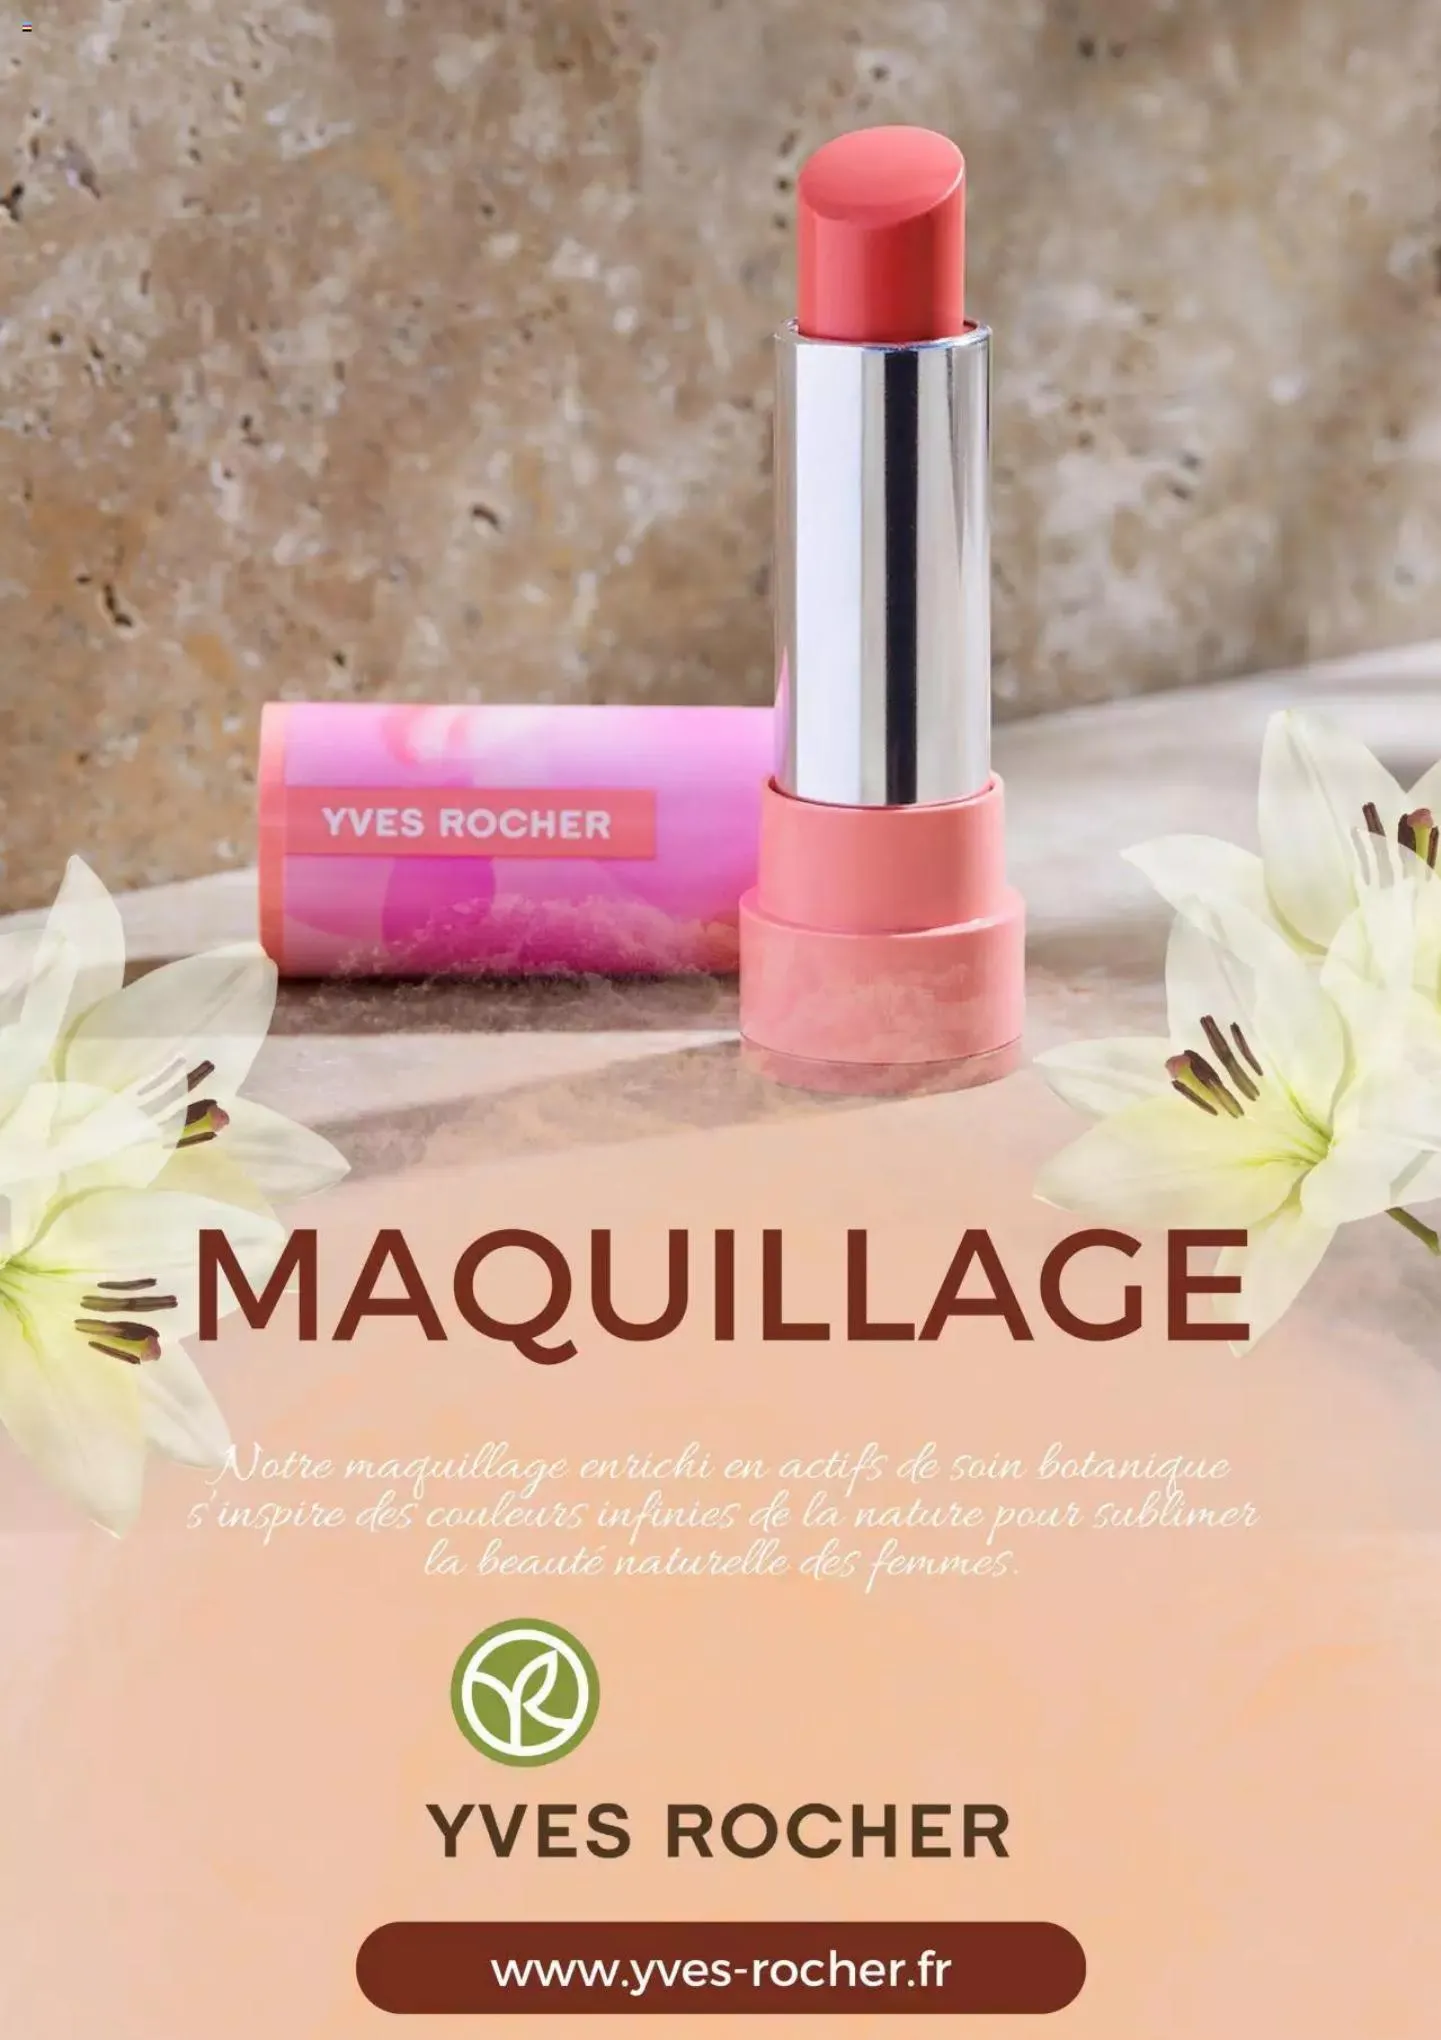 Catalogue Maquillage Yves Rocher, page 00001